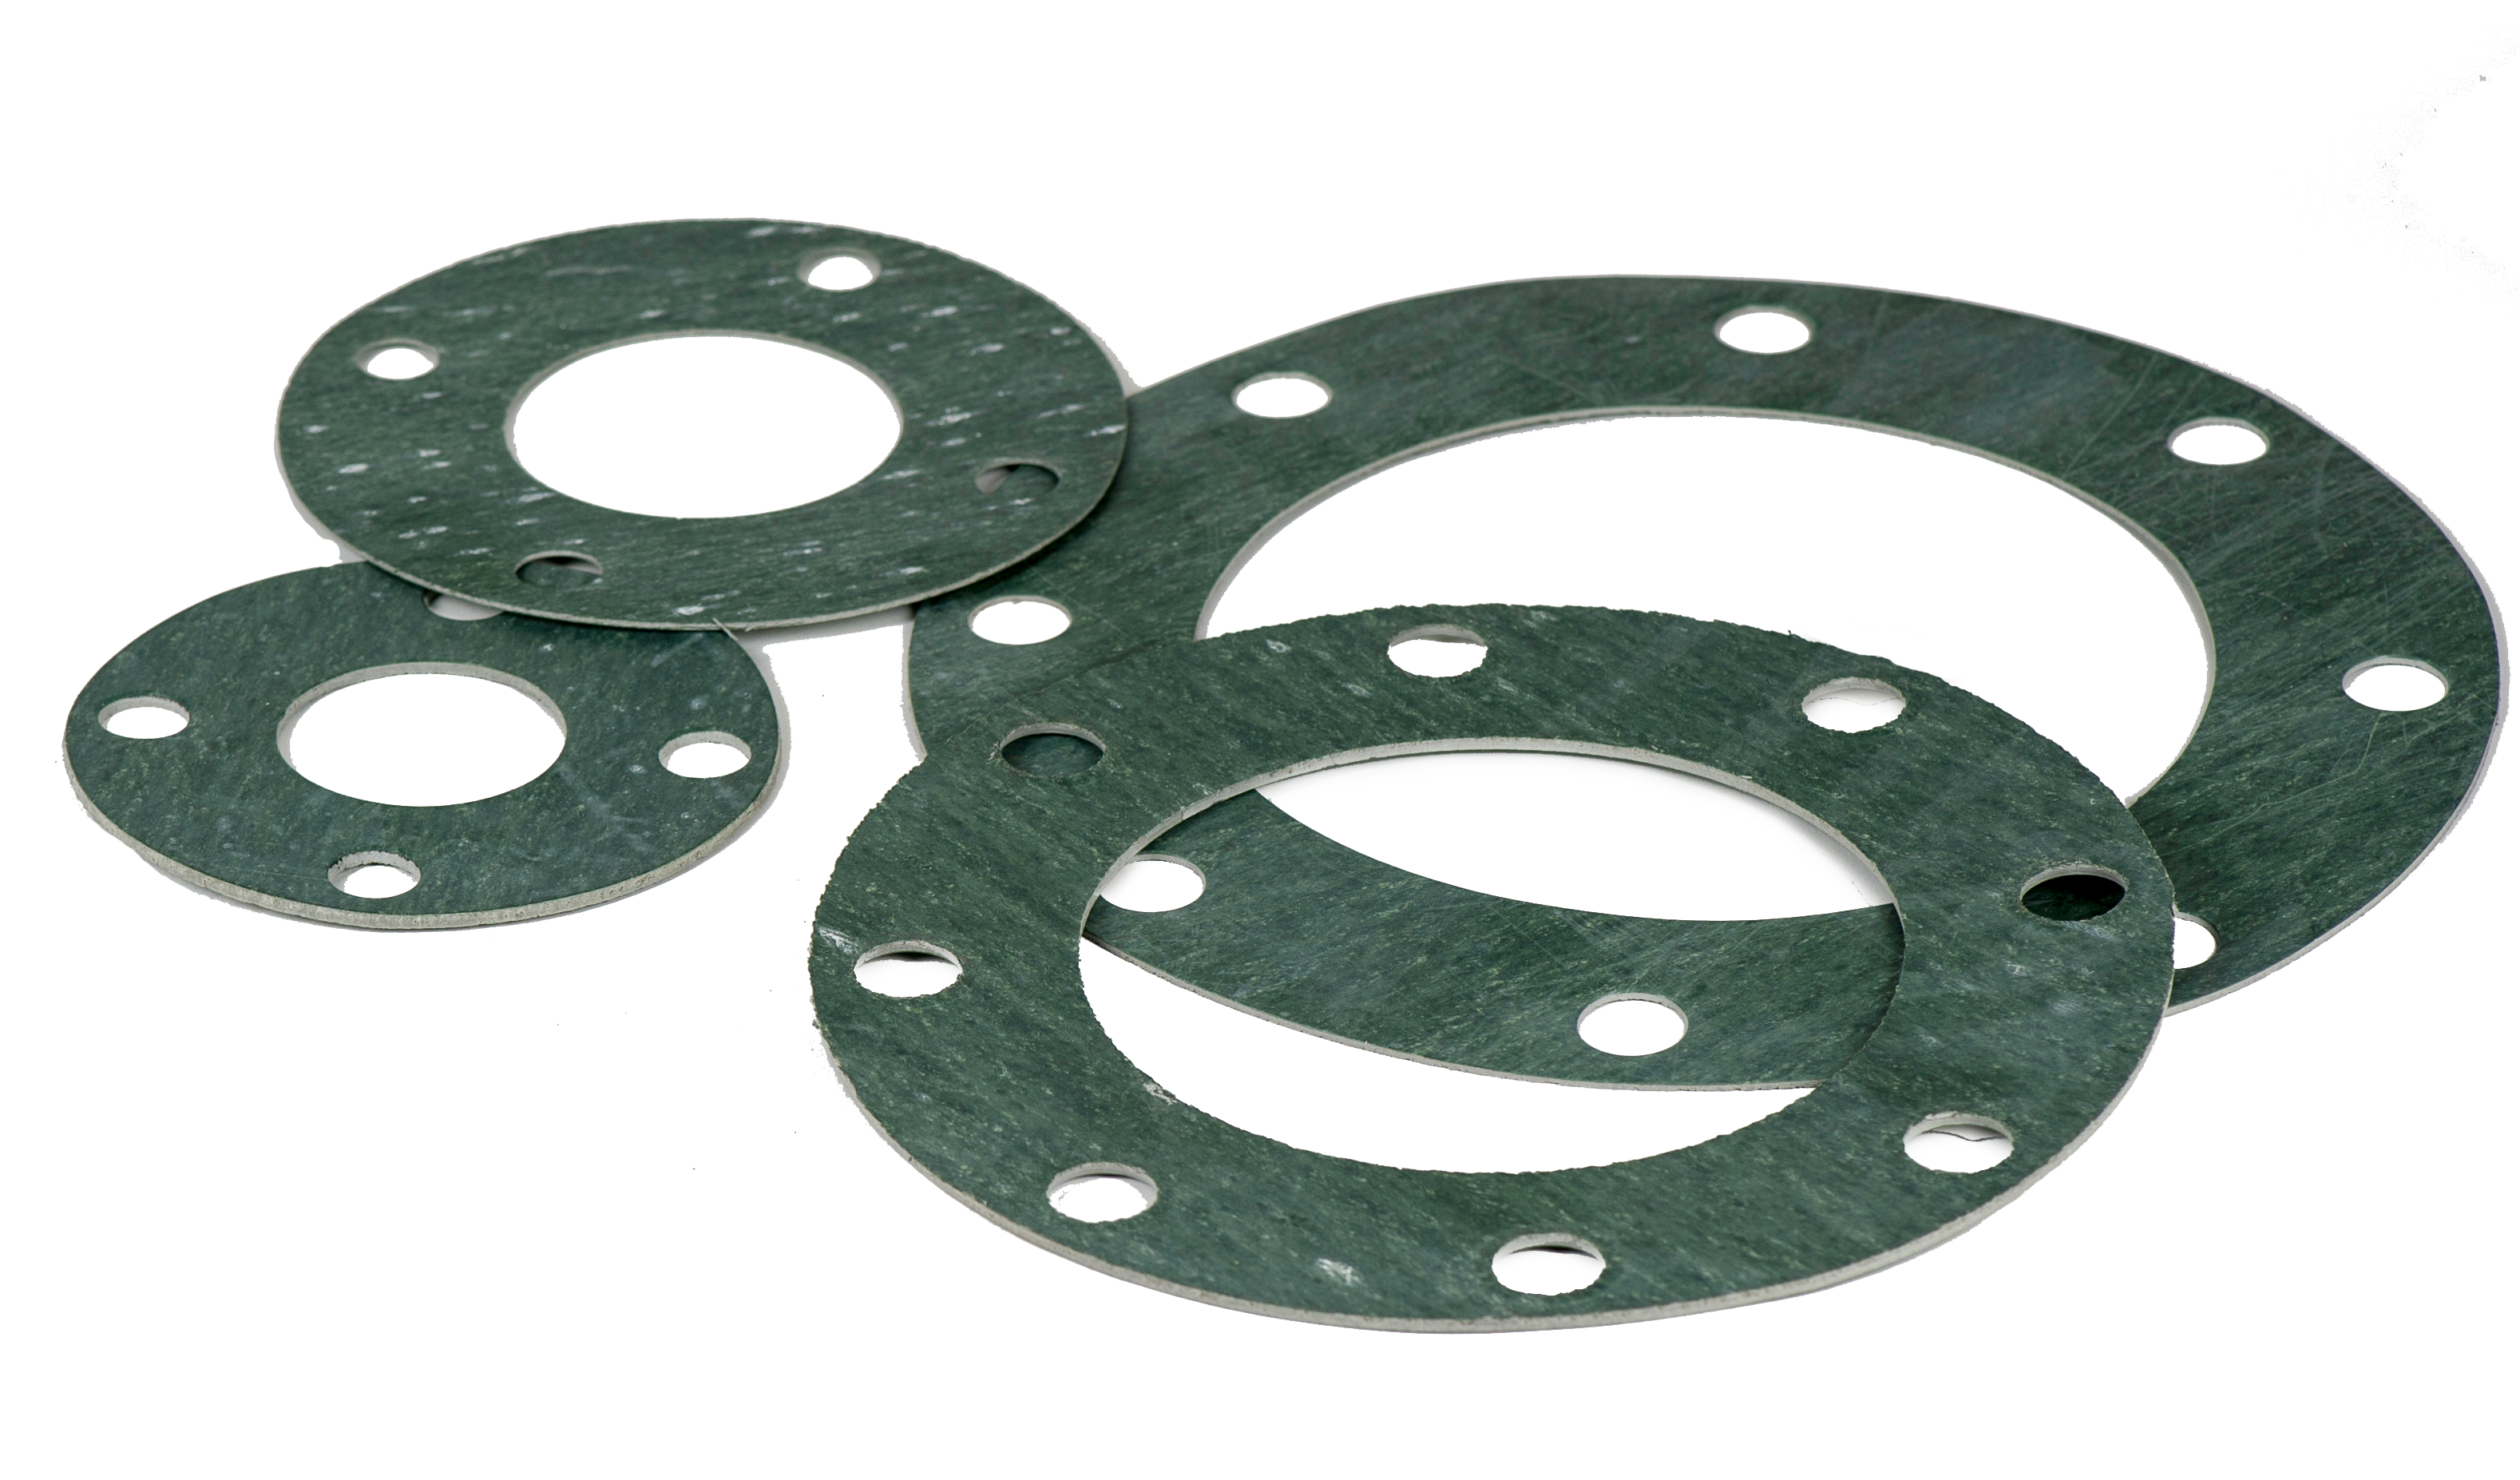 Class 150 USA Sealing Full Face Viton Rubber Flange Gasket for 6 Pipe 1/8 Thick 